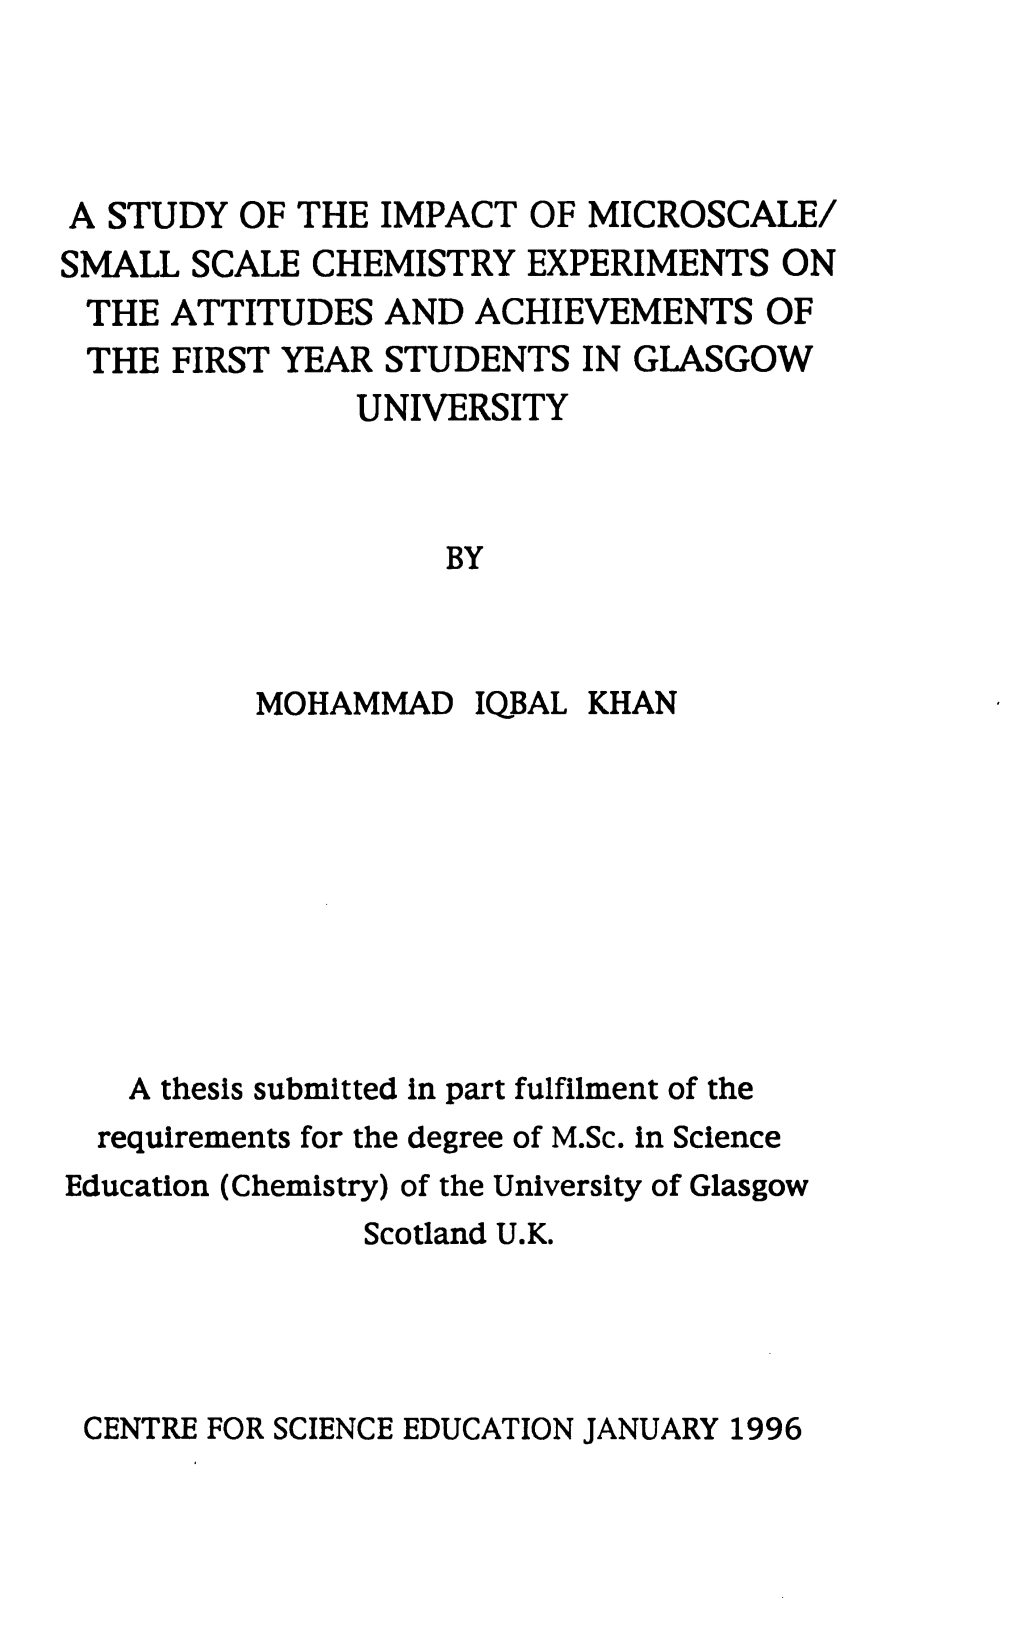 A Study of the Impact of Microscale/ Small Scale Chemistry Experiments on the Attitudes and Achievements of the First Year Students in Glasgow University